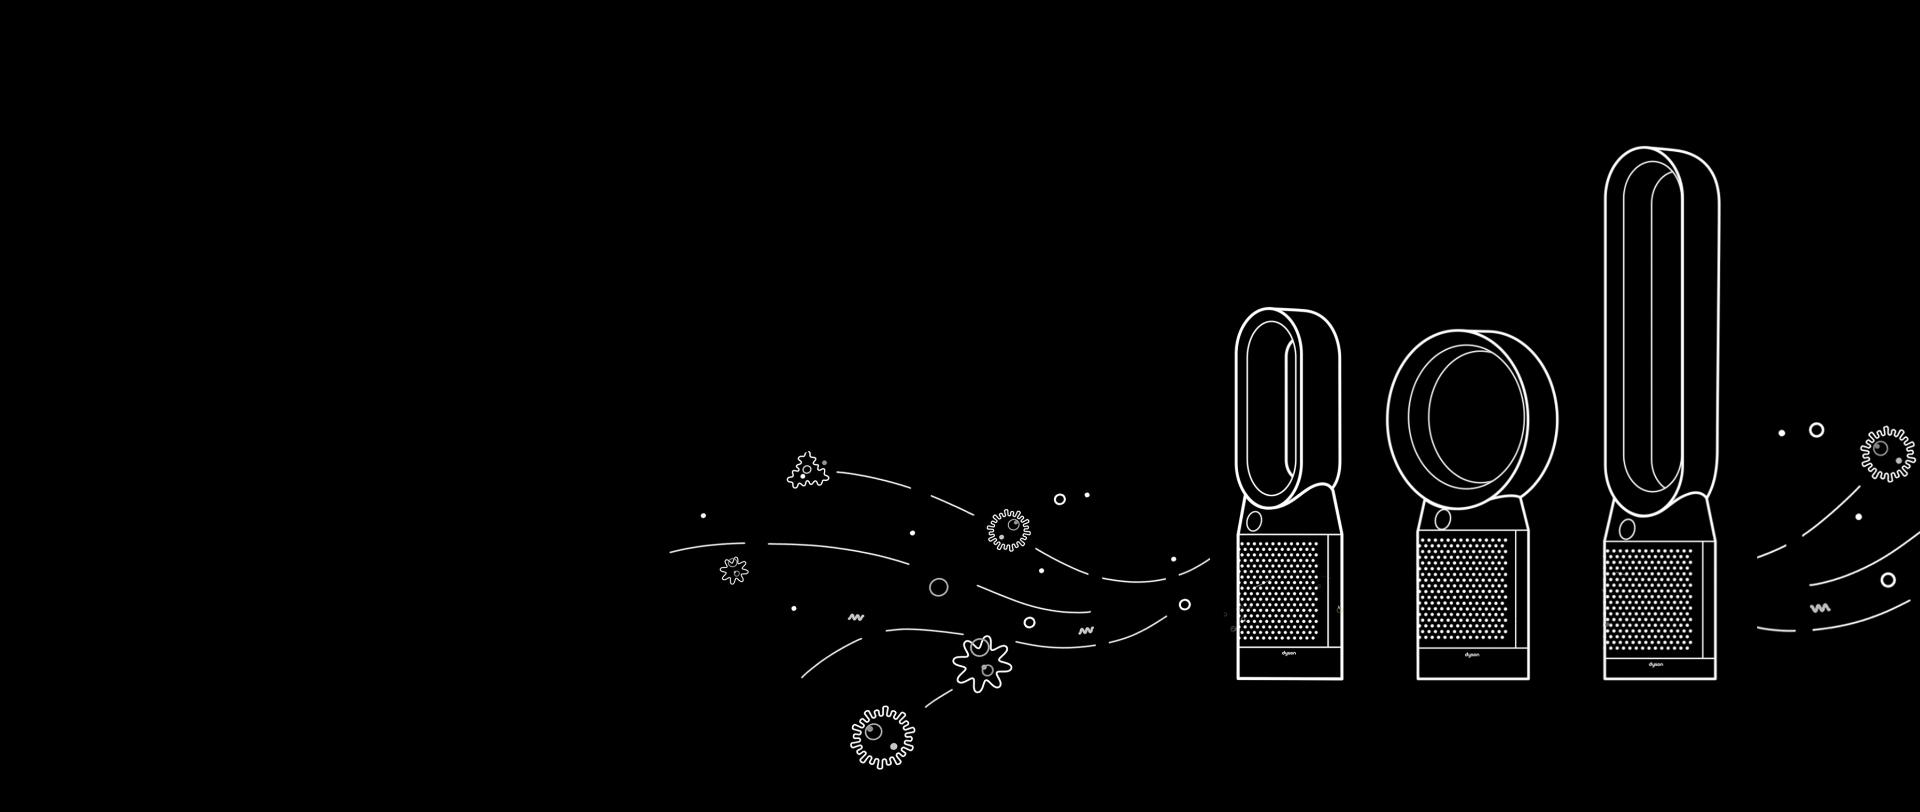 Illustration of a Dyson air purifiers capturing bacteria and germs